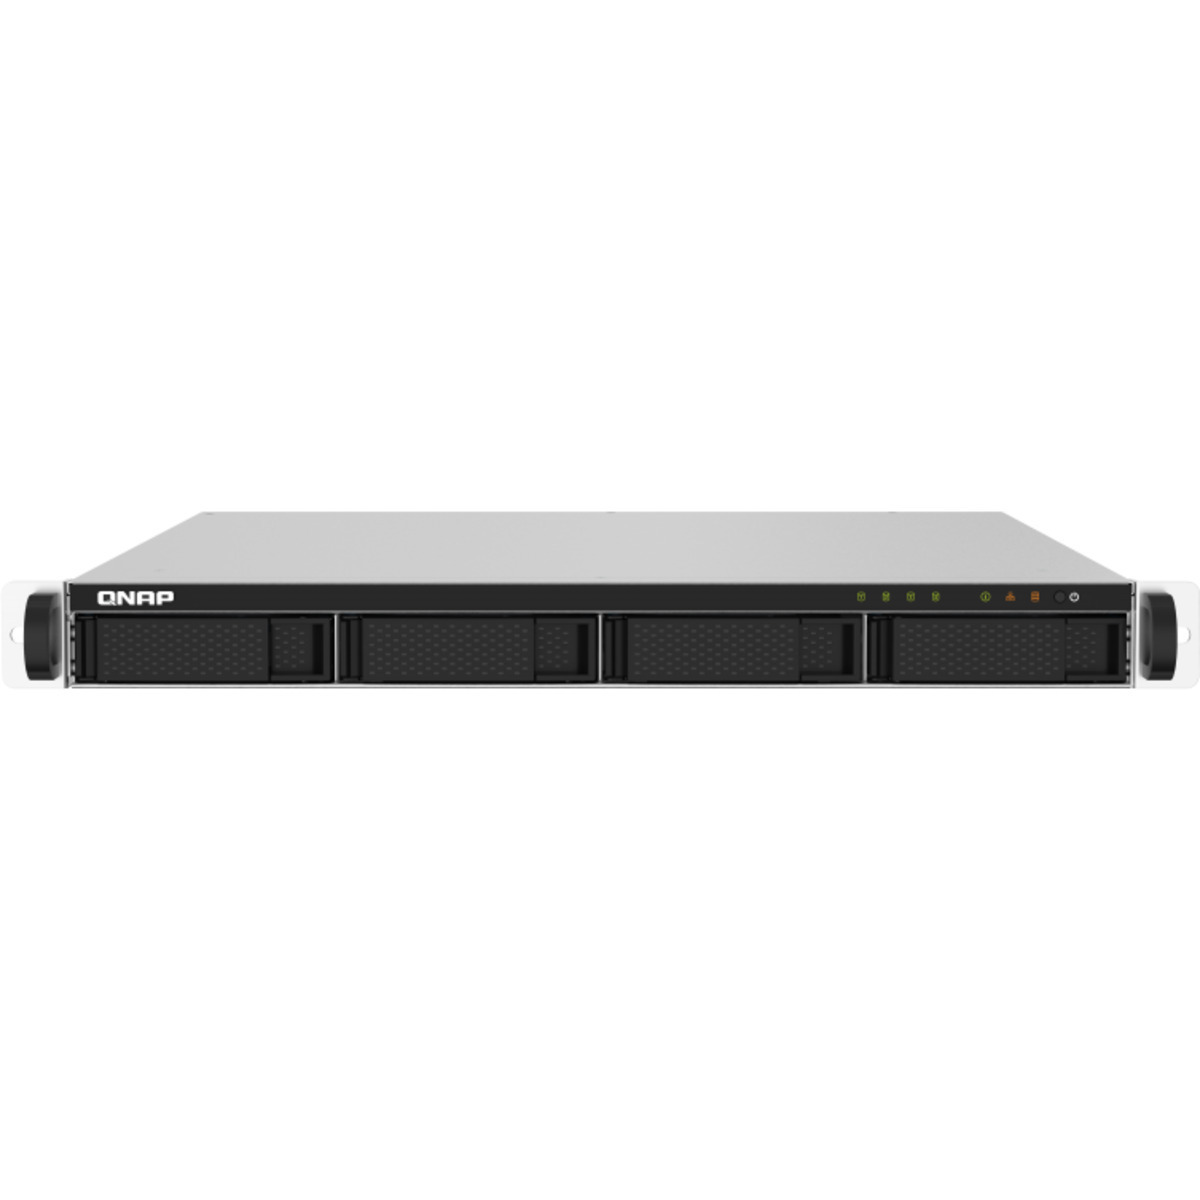 QNAP TS-432PXU 54tb 4-Bay RackMount Personal / Basic Home / Small Office NAS - Network Attached Storage Device 3x18tb Western Digital Red Pro WD181KFGX 3.5 7200rpm SATA 6Gb/s HDD NAS Class Drives Installed - Burn-In Tested - FREE RAM UPGRADE TS-432PXU